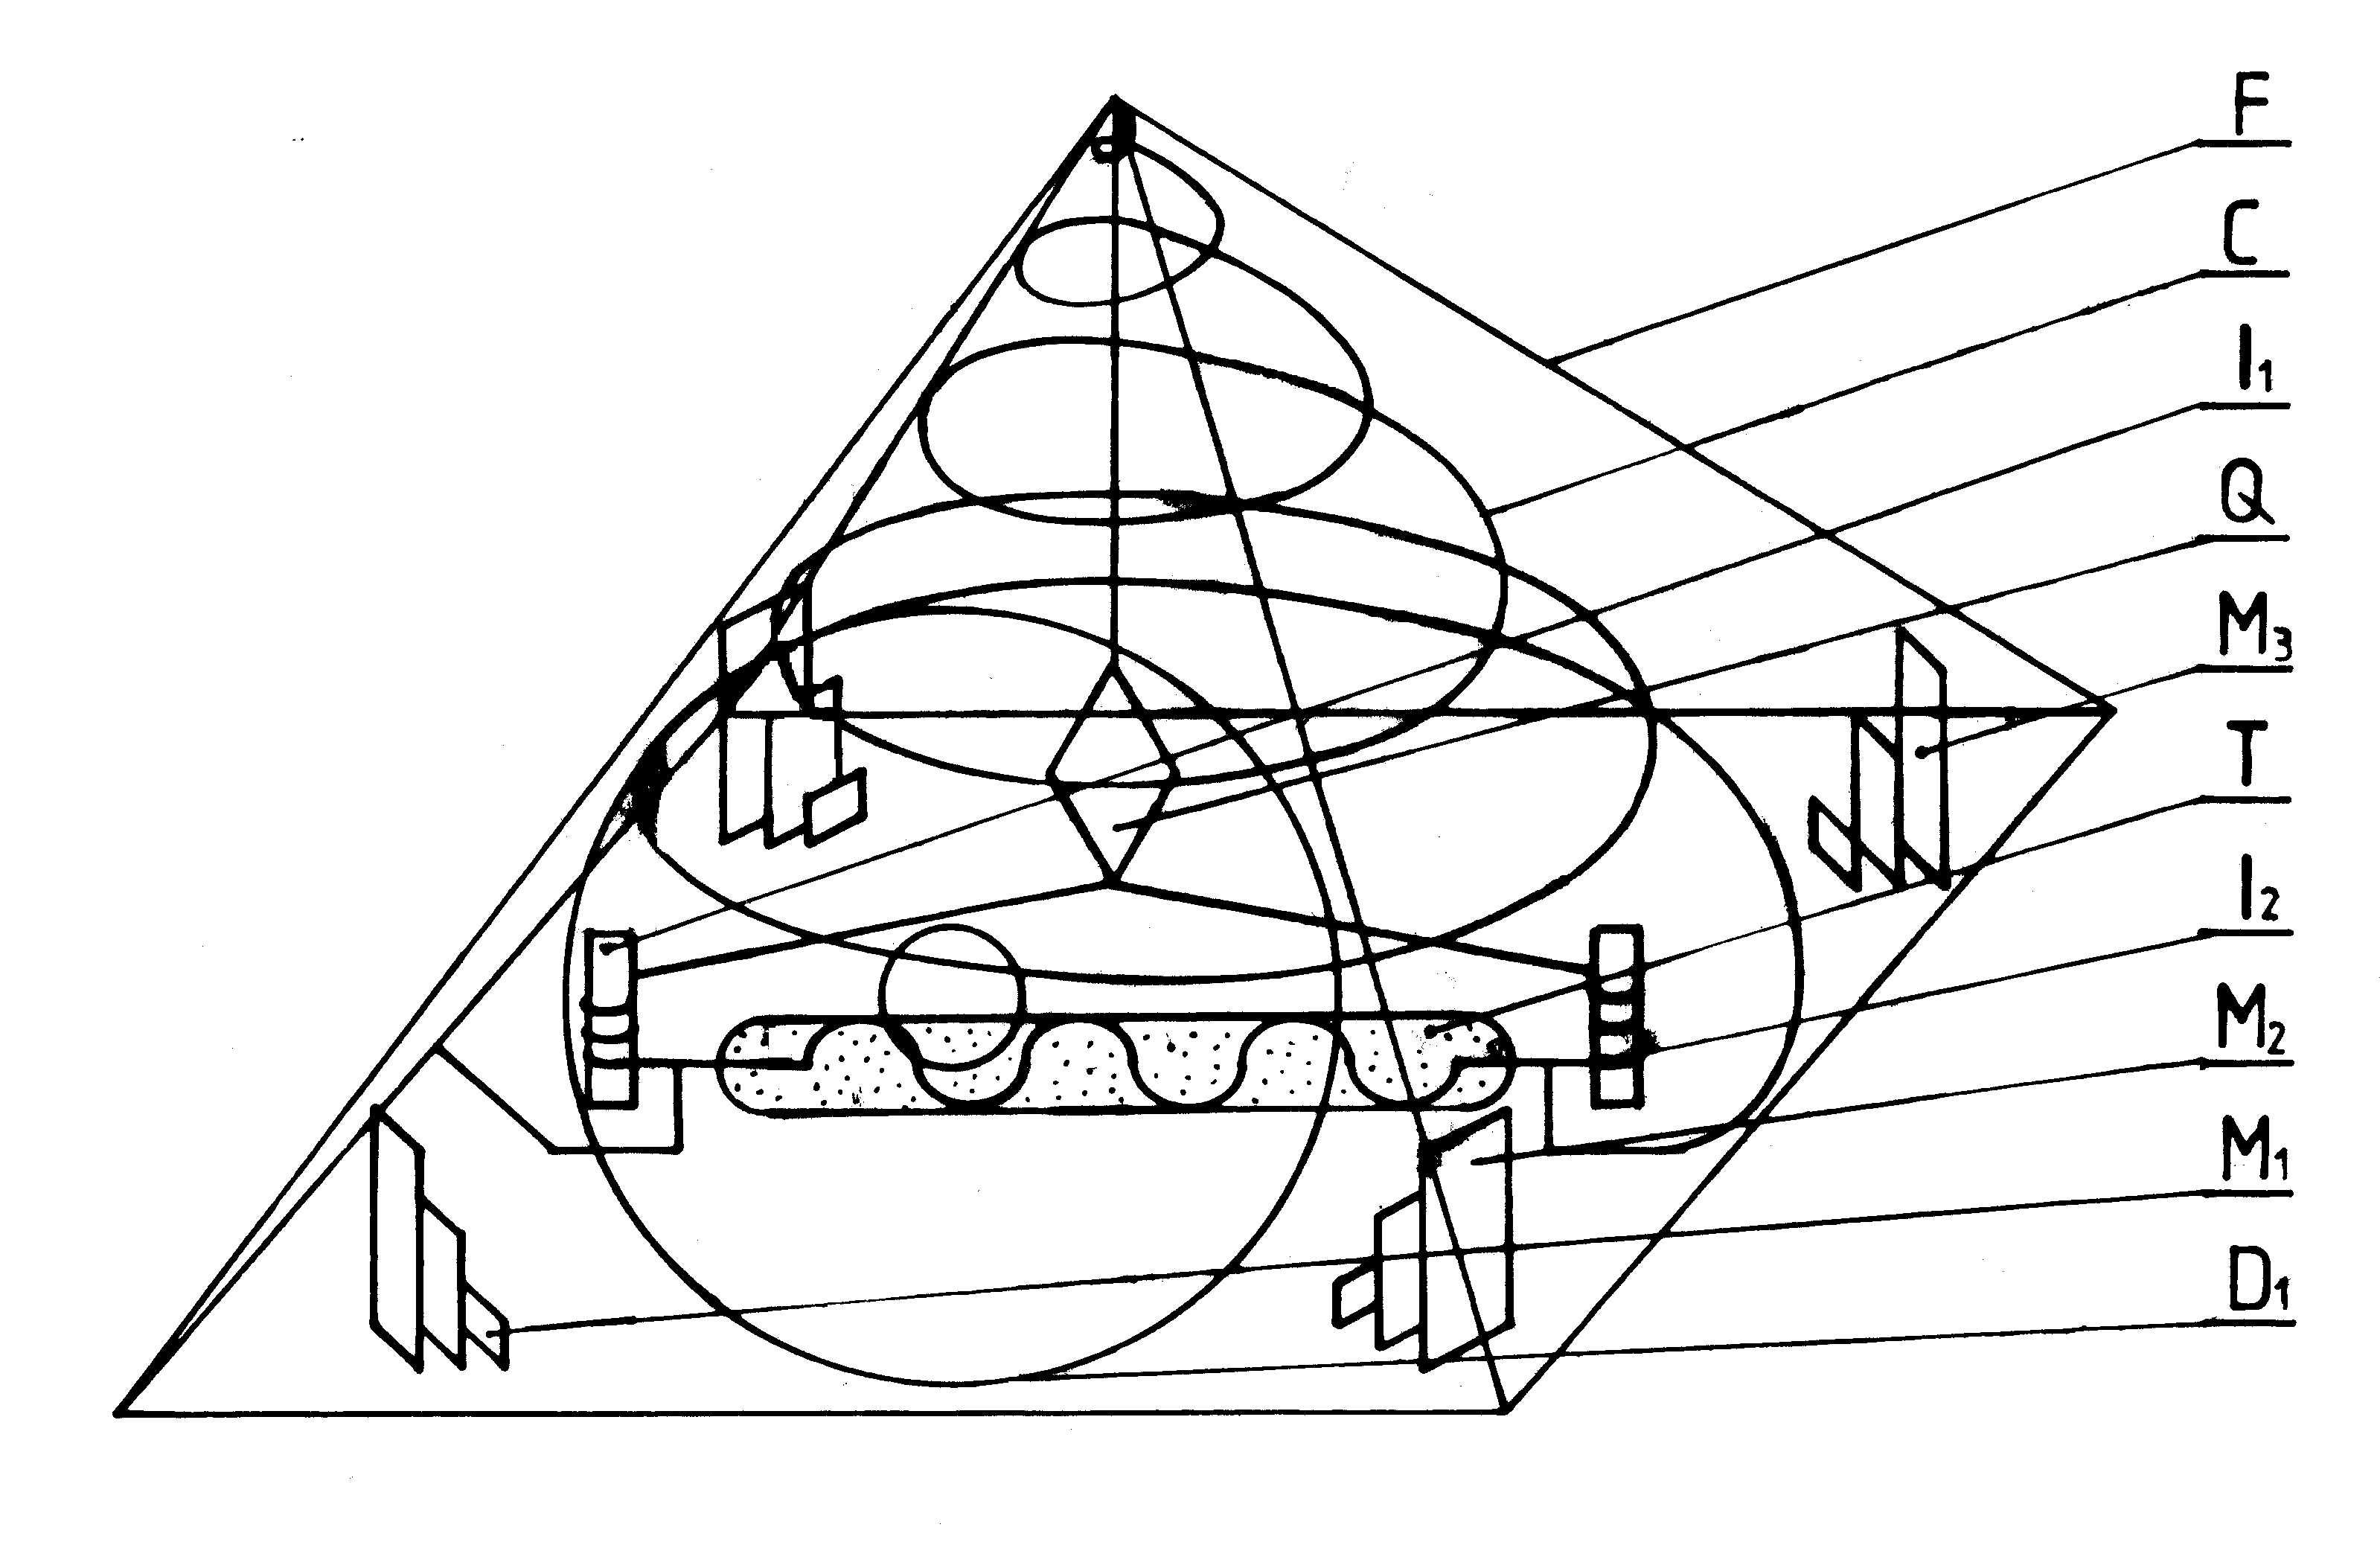 Fig. #C3: Design of the Telepathic Pyramid (Fig. K2 from [1/5]).